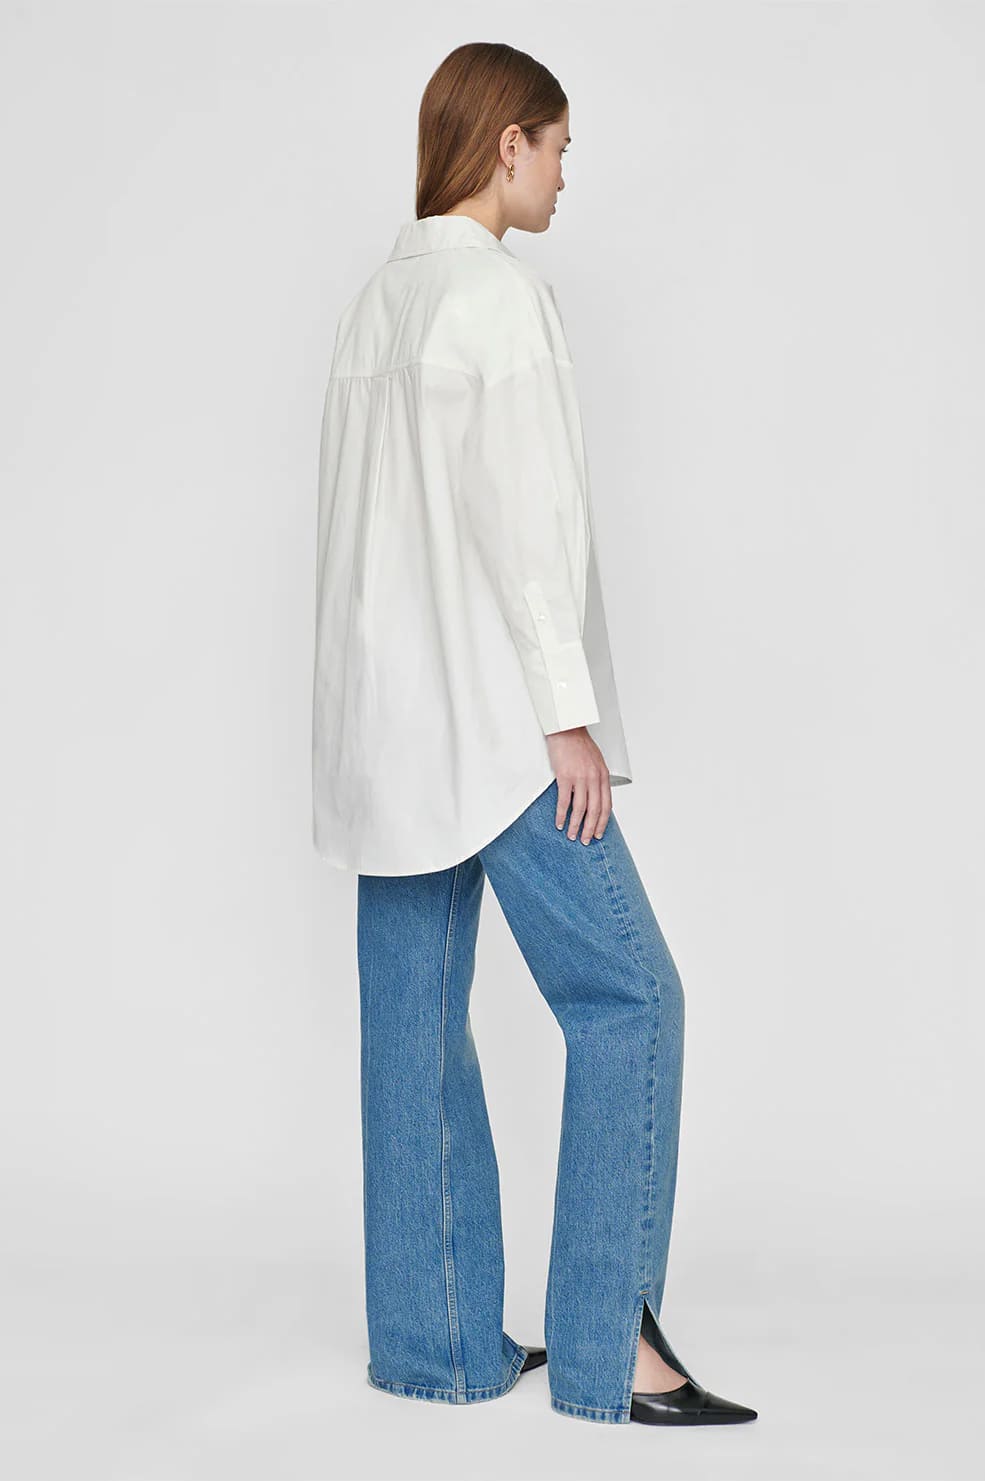 Anine Bing Mika Shirt in White from The New Trend